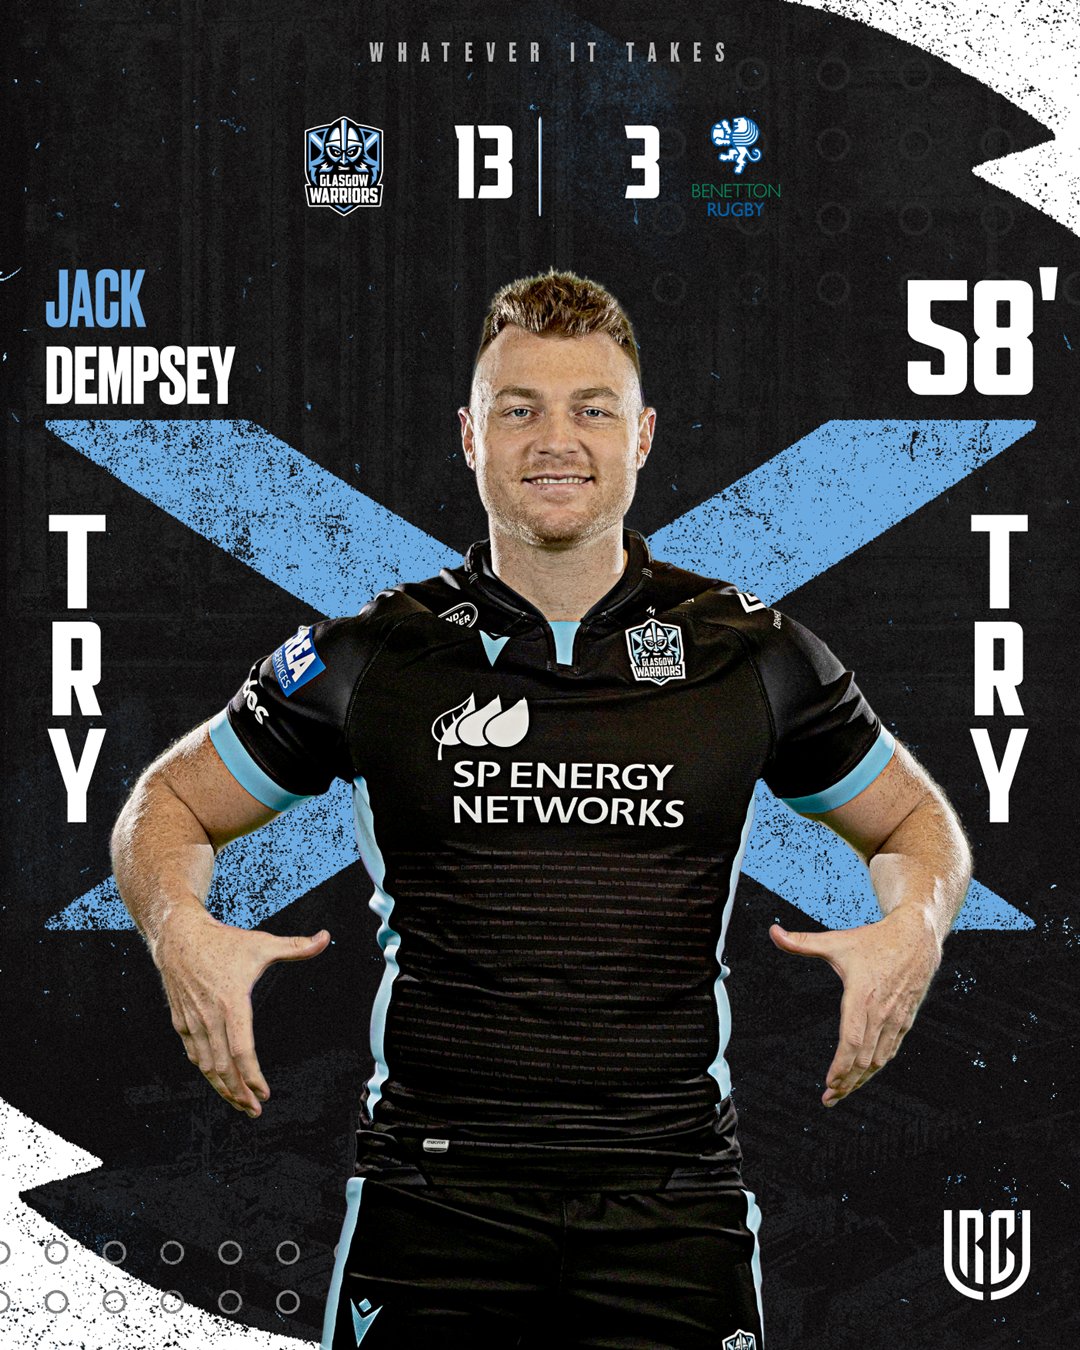 jacht Lezen schuifelen Glasgow Warriors on Twitter: "58' | TRY!!! Once again we pummel the Benetton  line and this time it's Jack Dempsey's turn to power through two tacklers  to dot down for our second.